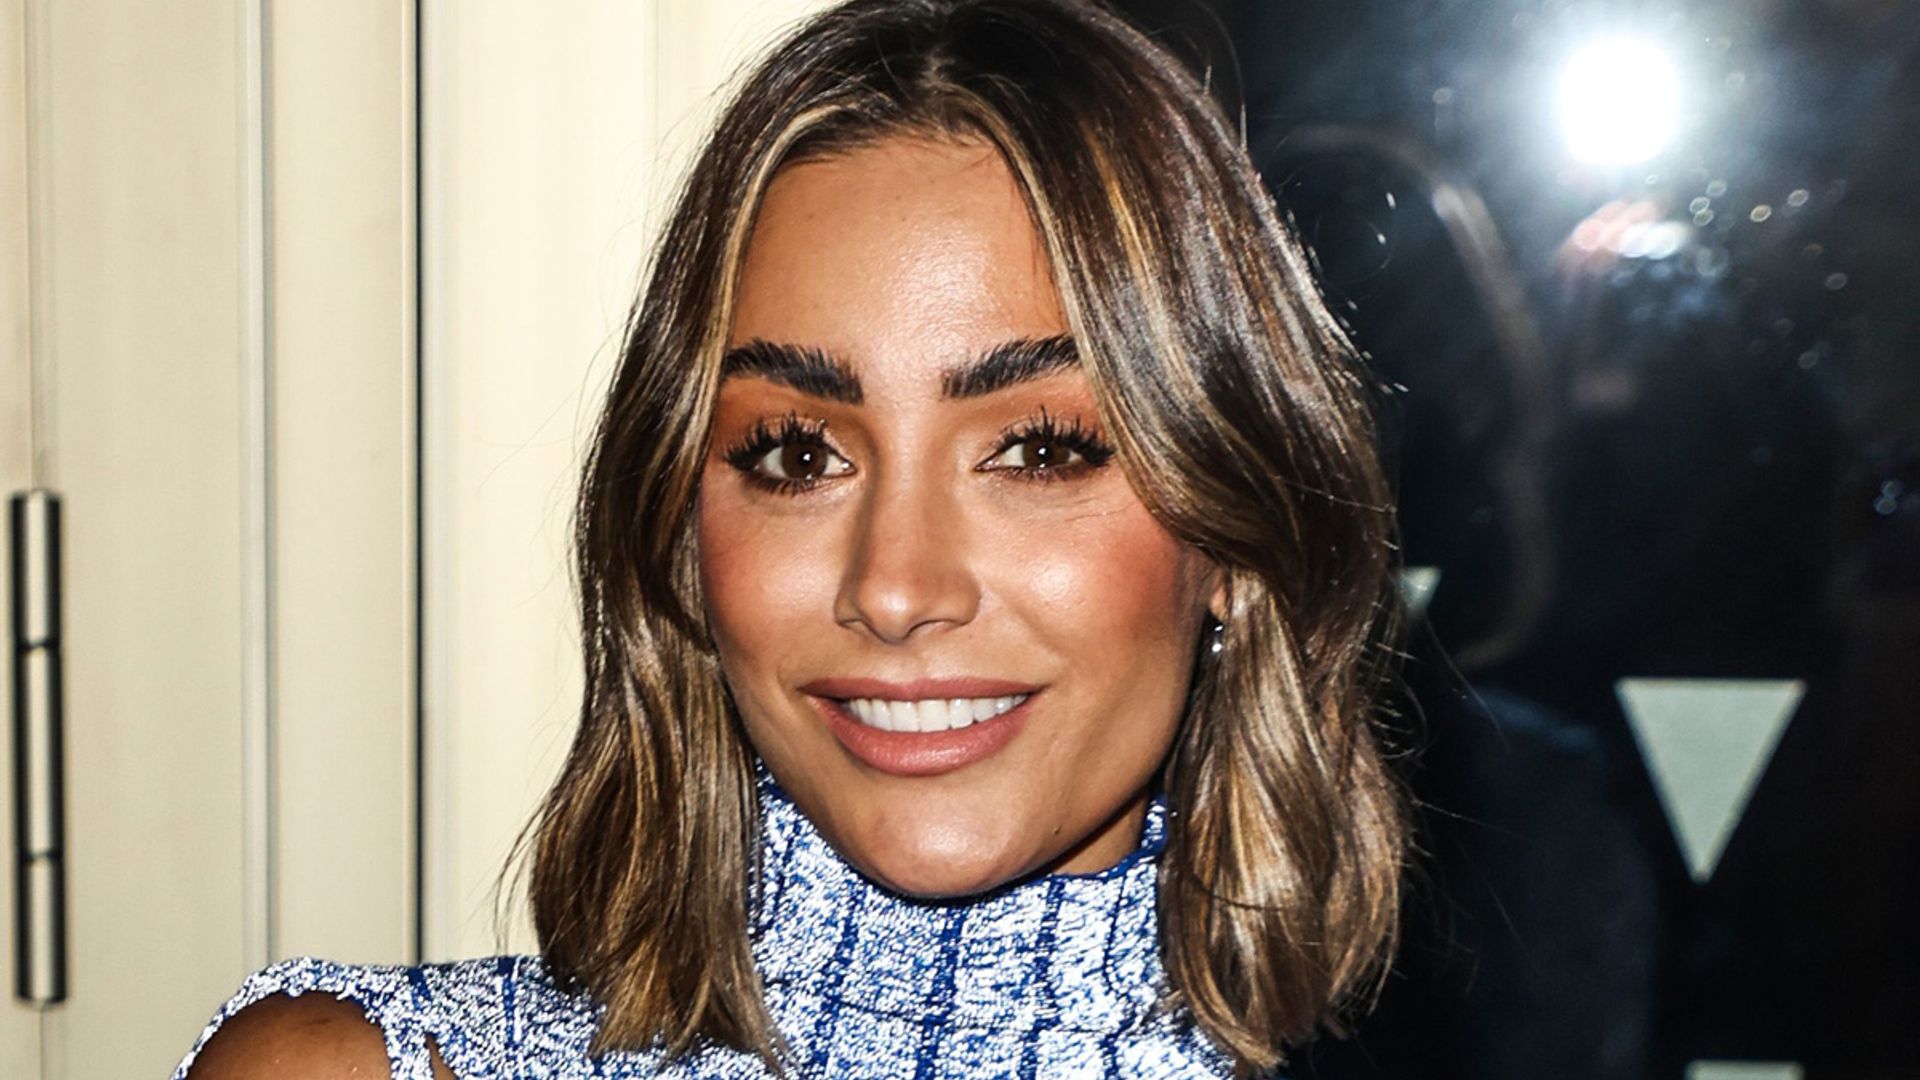 Frankie Bridge wows in unexpected string dress – but fans are confused